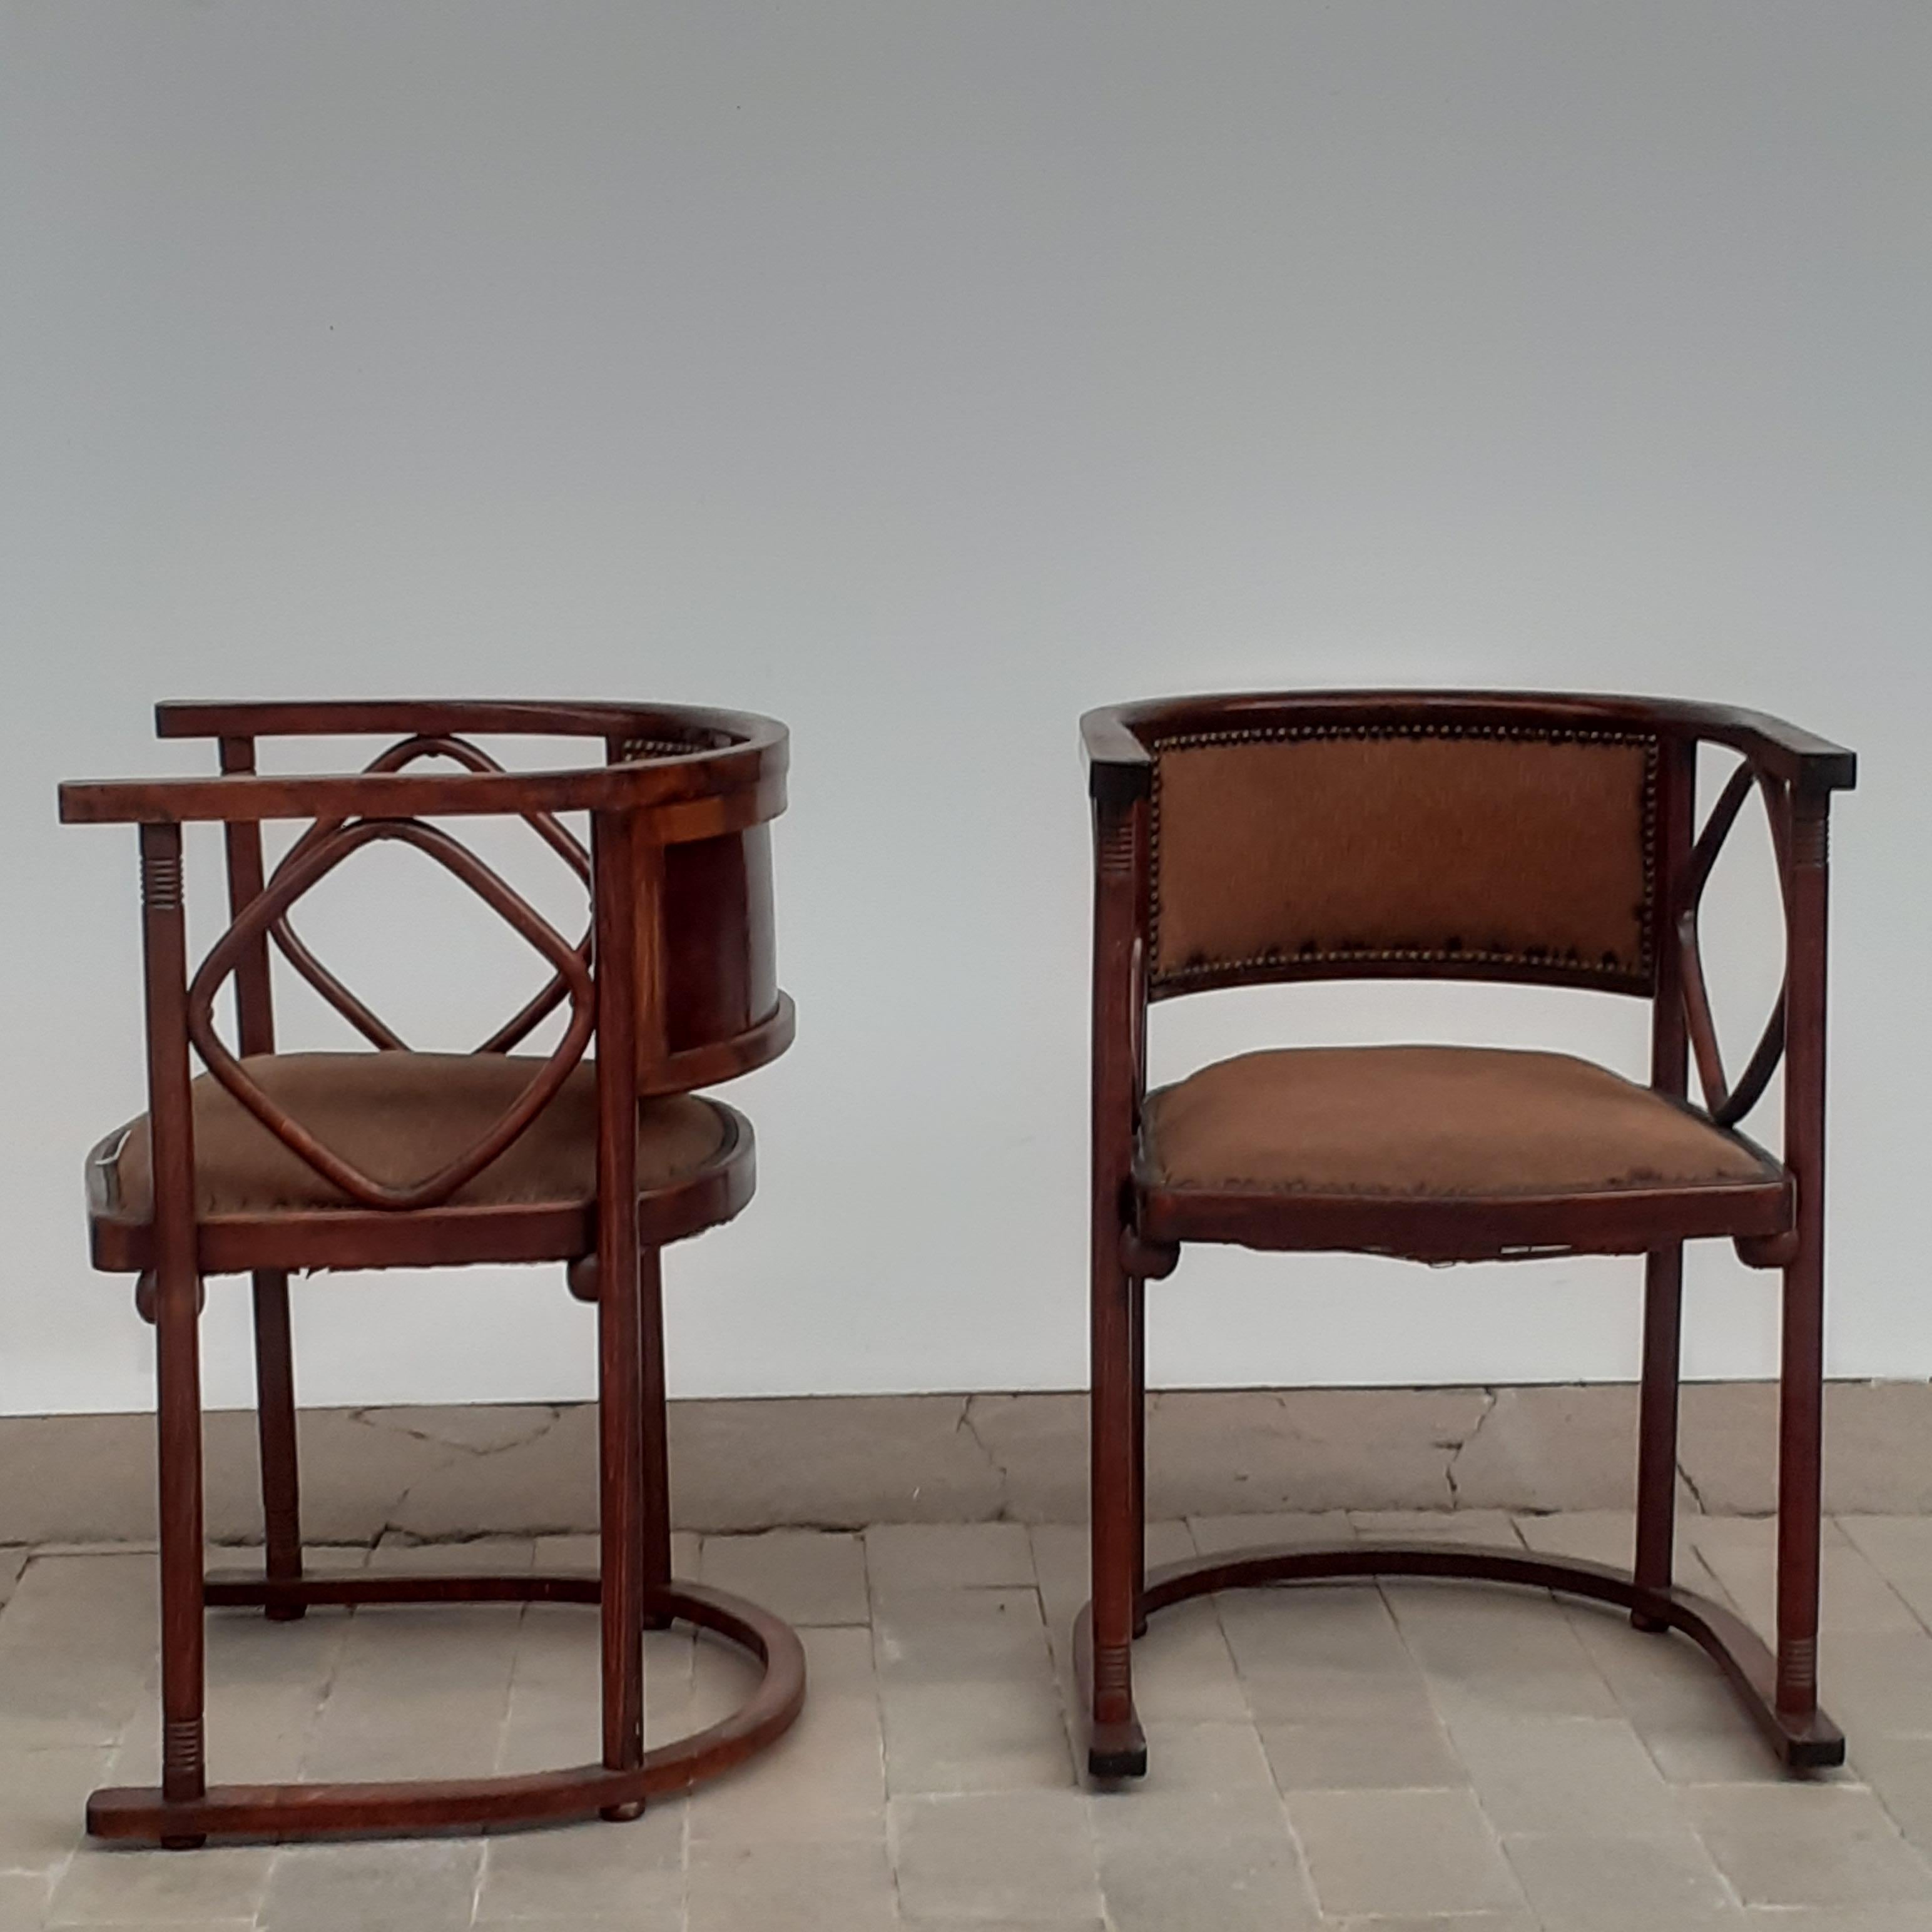 Rare set of 2 armchairs, 2 chairs and a bench, designed by Josef Hoffmann in the 1900s, J. & J. kholn editor, Vienna.
These beech bentwood chairs feature mahogany stain curved frames with original upholstered seat cushions.
 Combining sleek